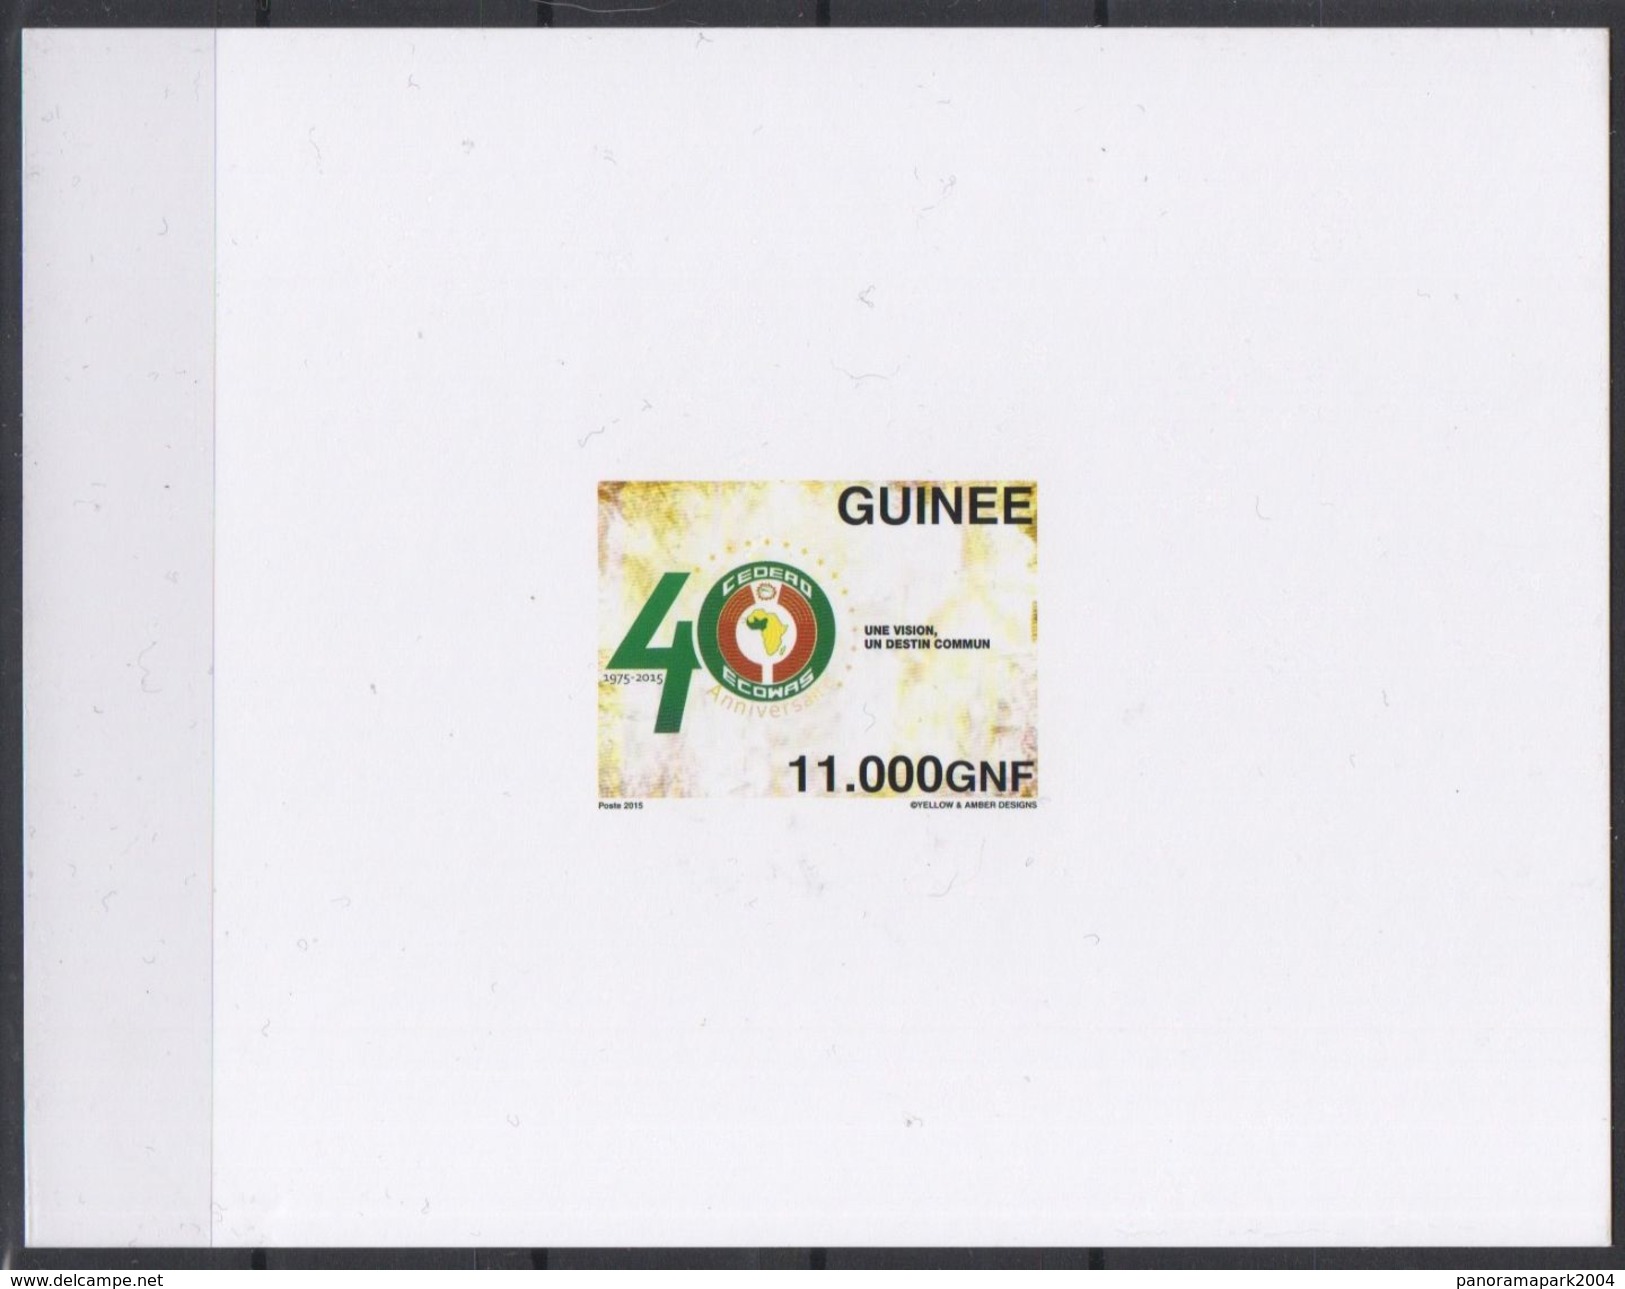 Guinée 2015 Scarce Proof EPREUVE DE LUXE Emission Commune Joint Issue CEDEAO ECOWAS 40 Ans 40 Years - Joint Issues